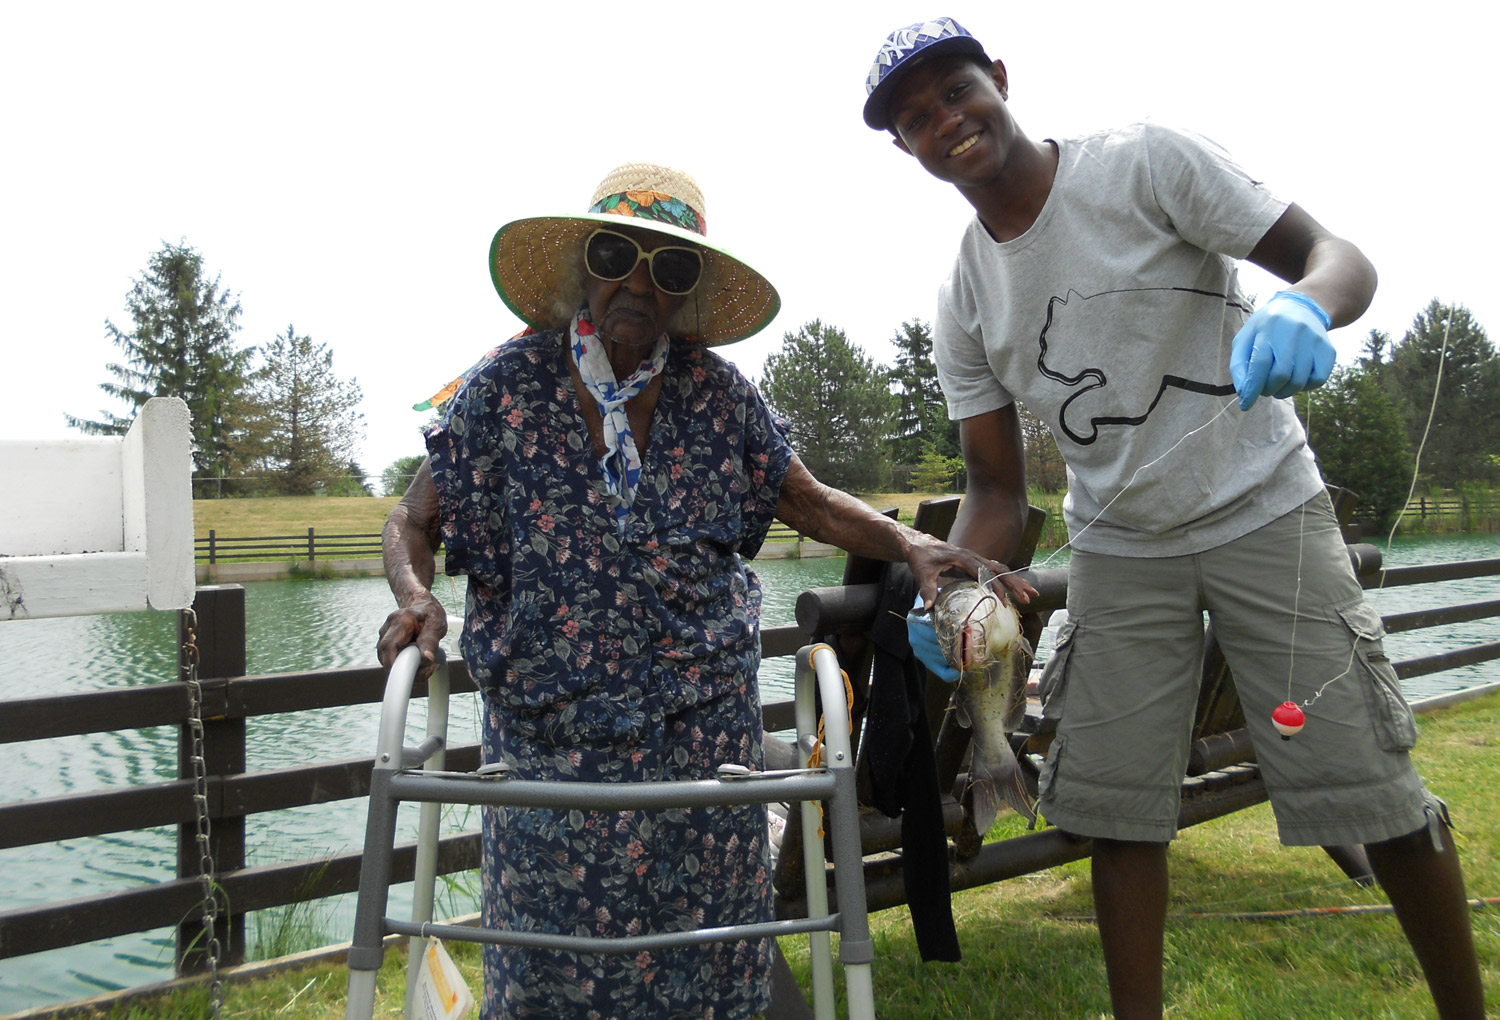 Jeralean Talley and godson Tyler Kinloch pictured with one of the seven catfish she caught at the Spring Valley Trout Farm in Dexter, Mich., on June 16, 2012. (Courtesy of Michael Kinloch)